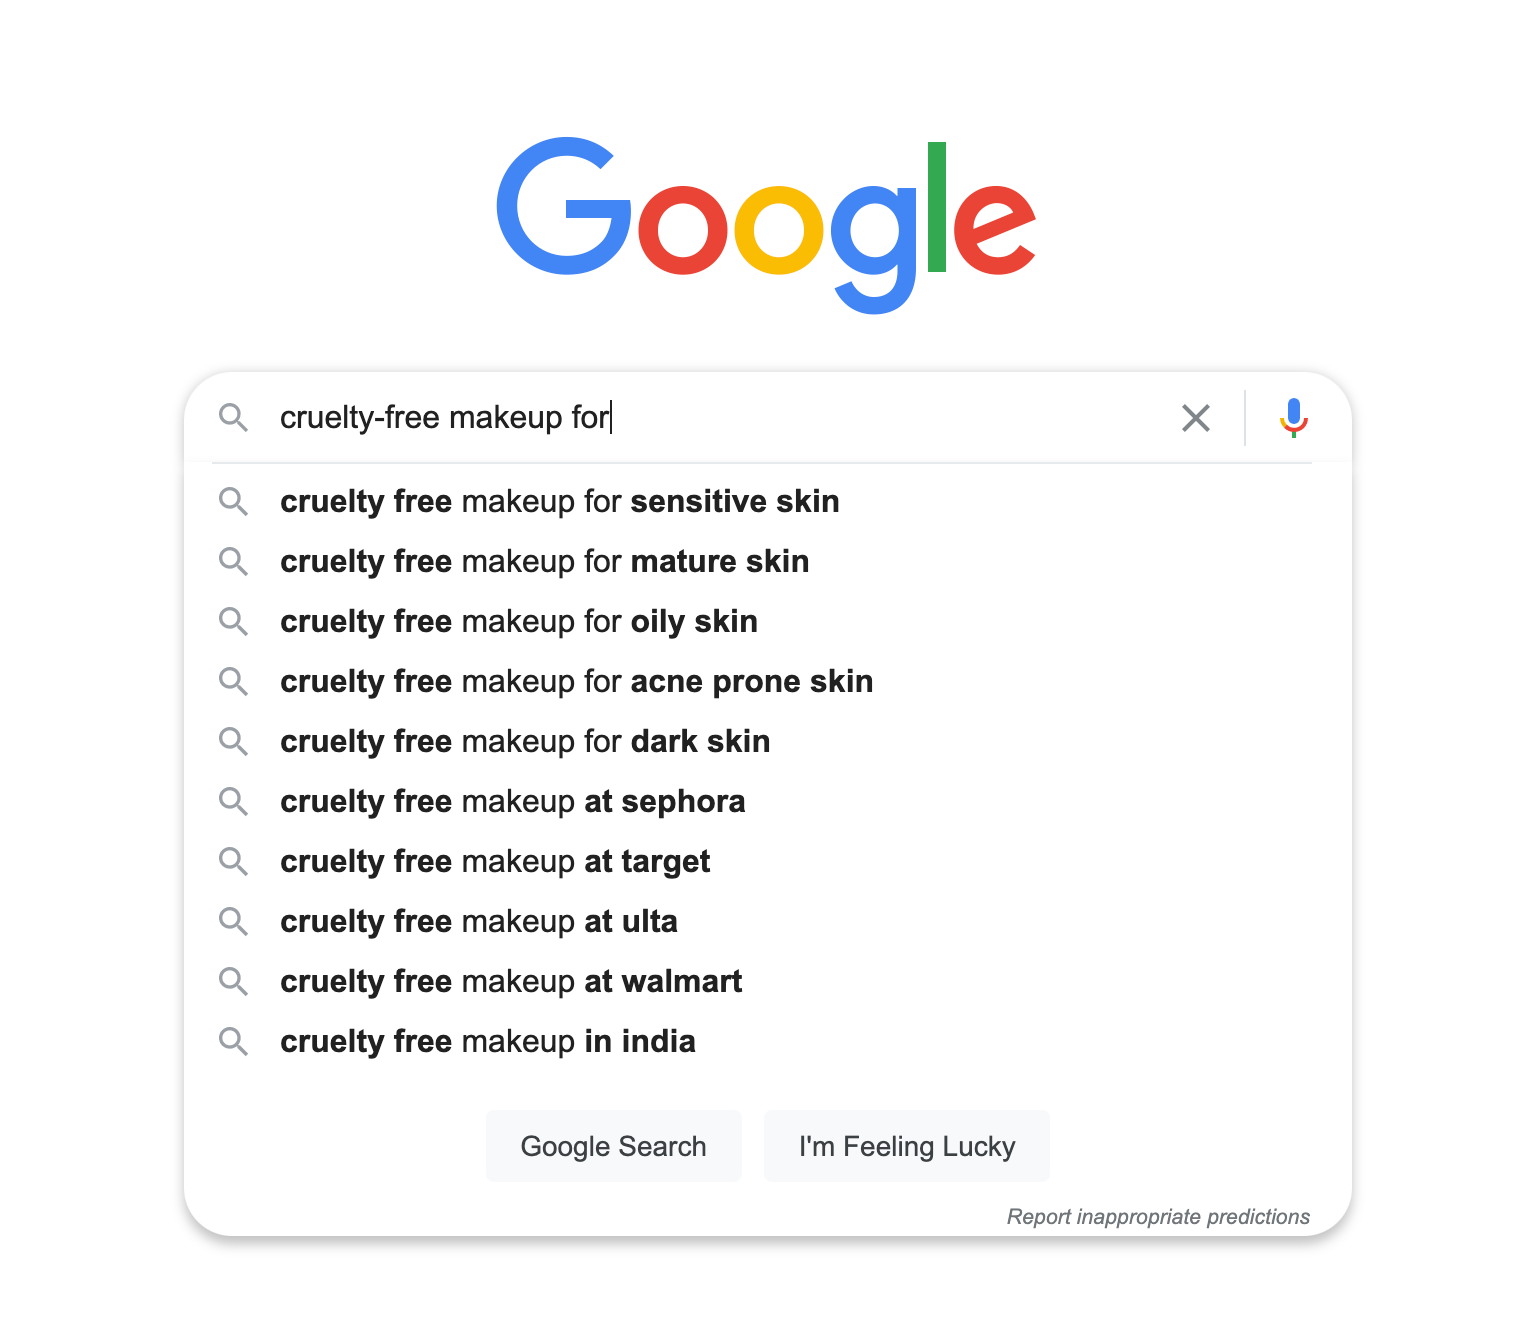 The Google search bar with autocomplete suggest for the query, “cruelty-free makeup for.”